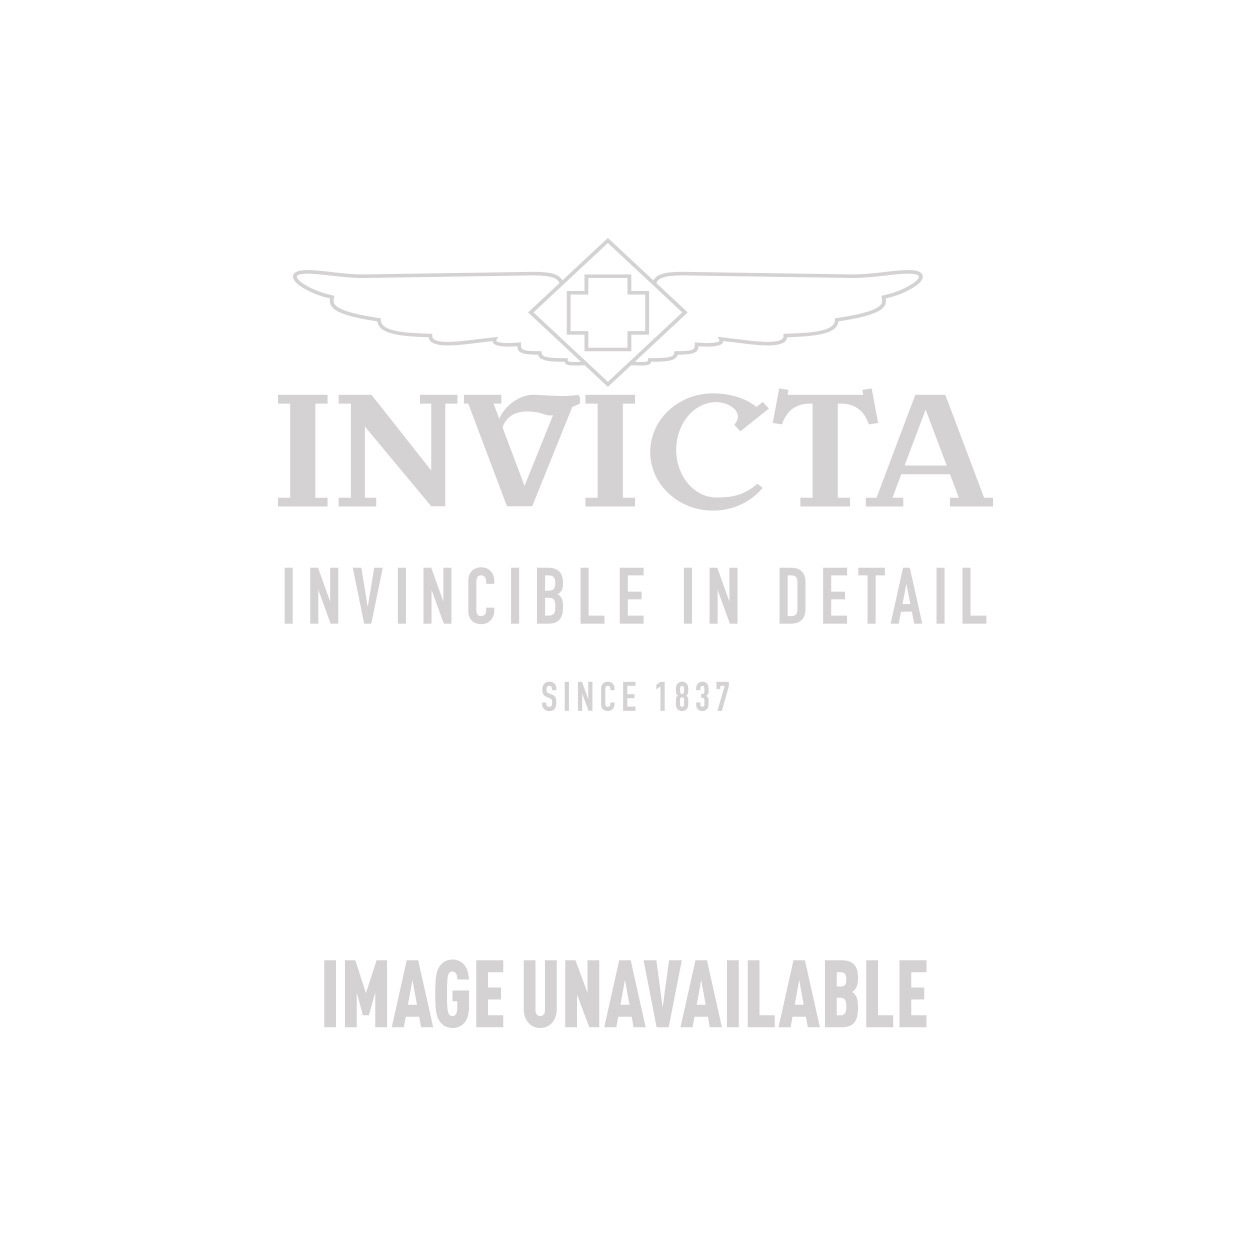 Invincible Guarantee - 100% Replacement Guarantee for Watches, Tier 8- 50-49